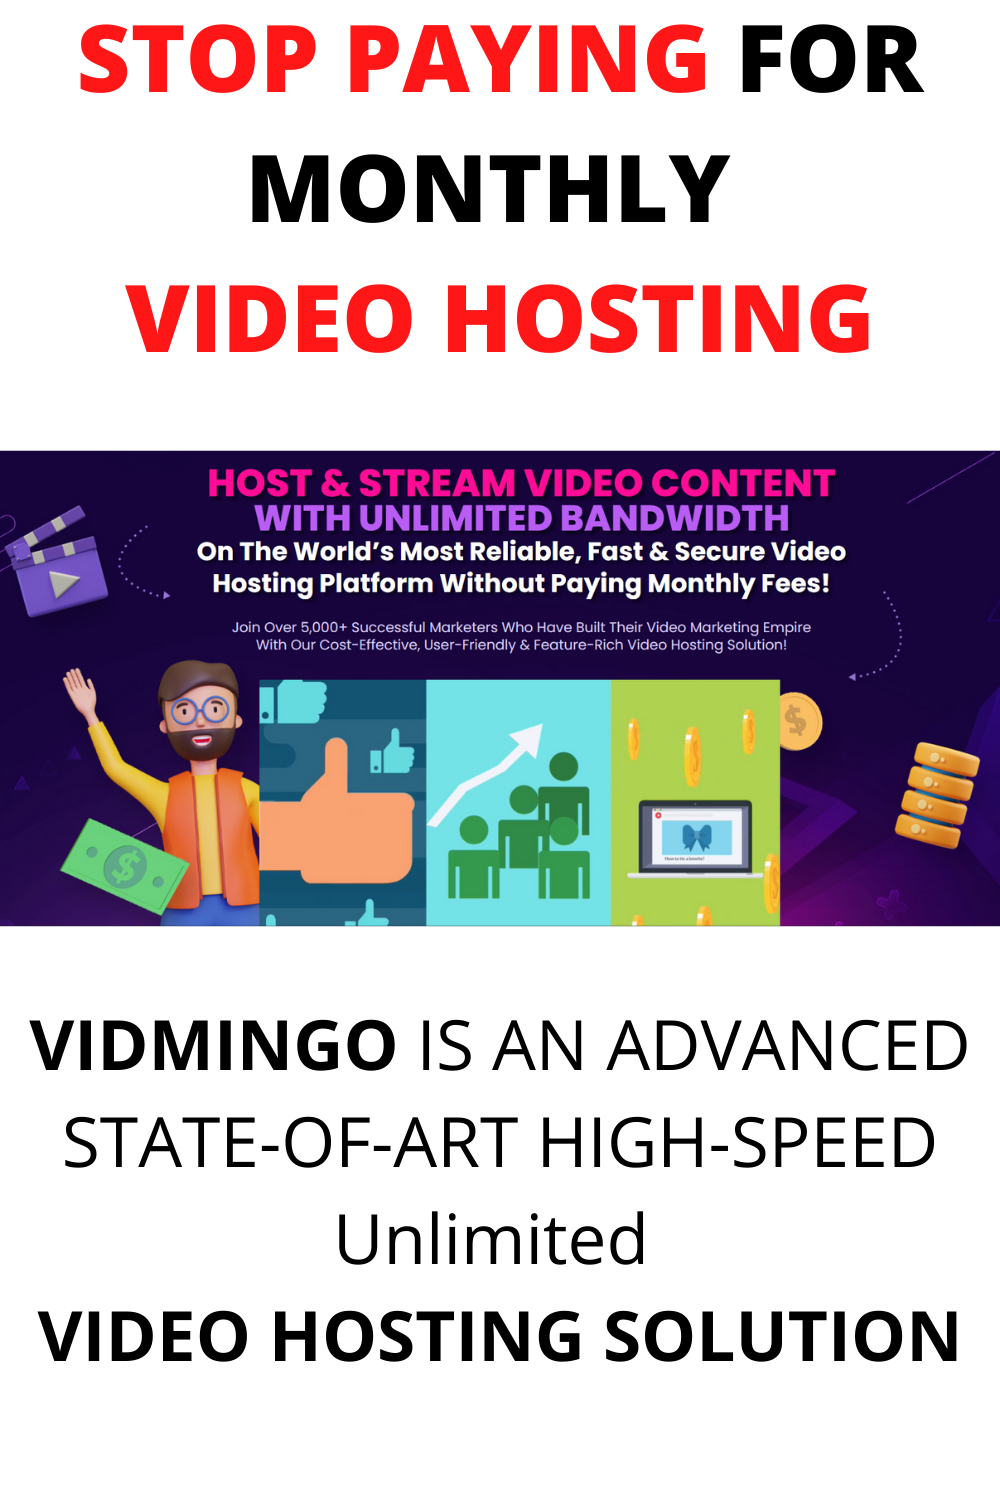 STOP PAYING FOR MONTHLY VIDEO HOSTING